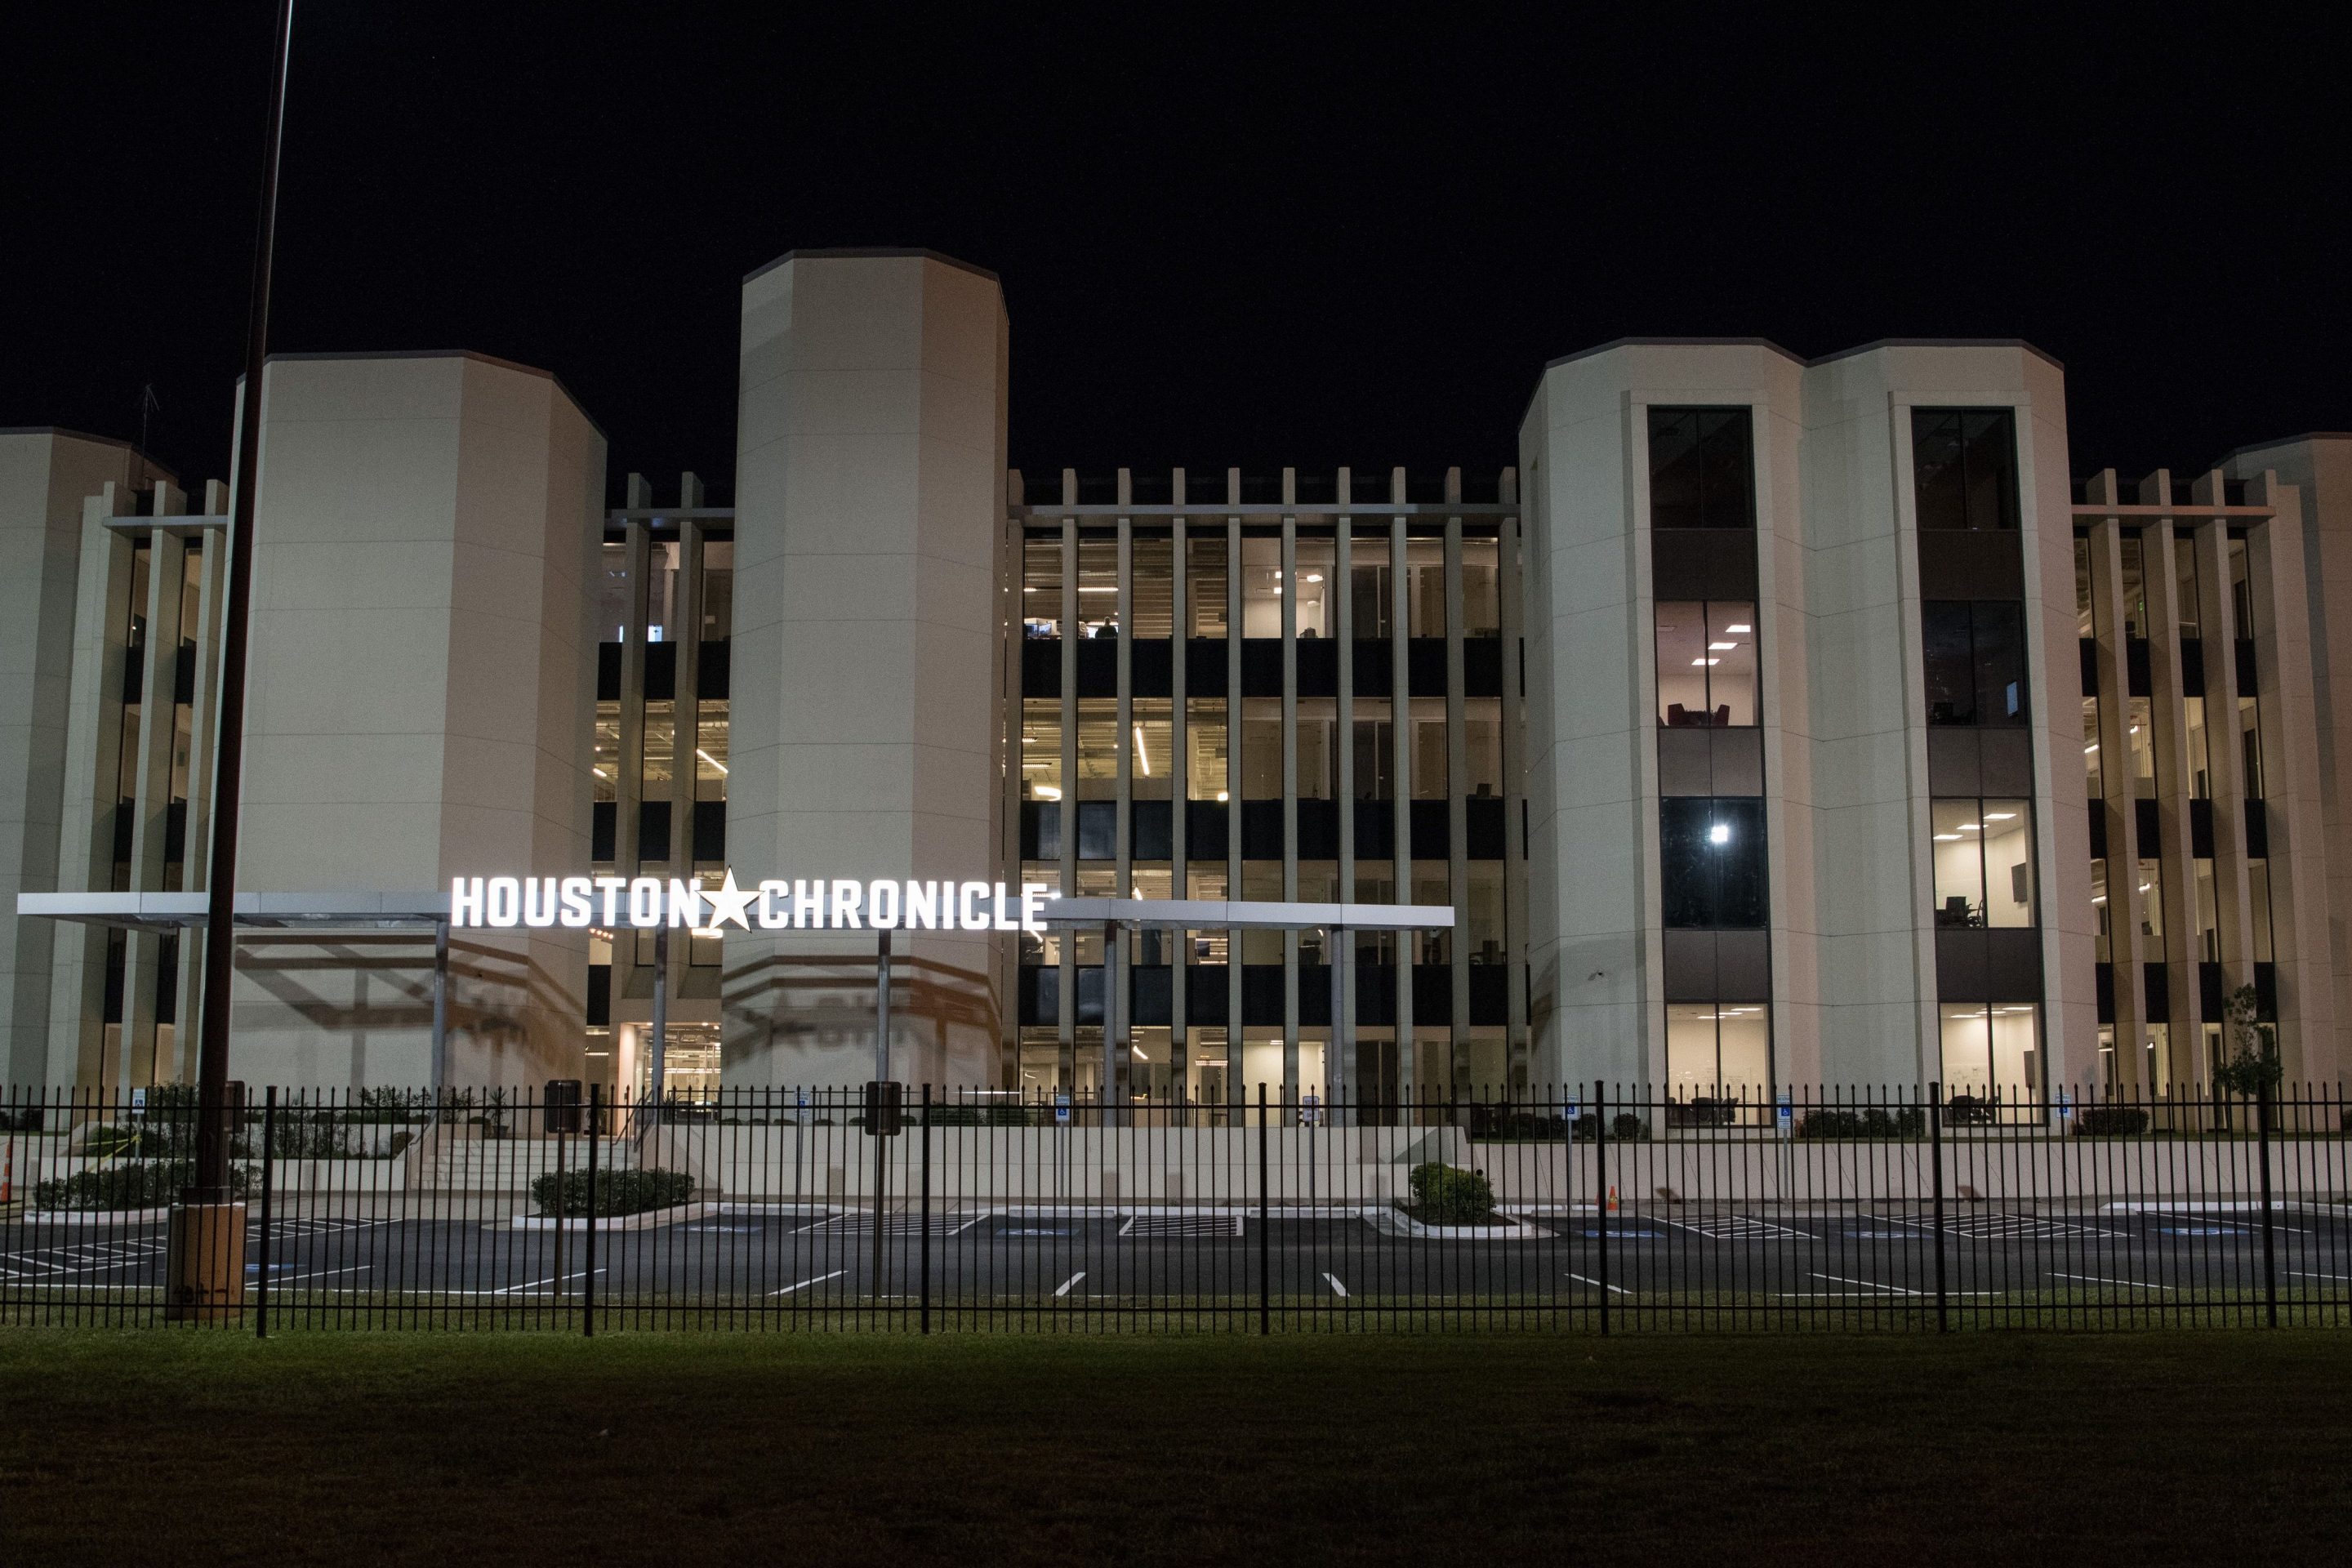 The front of the Houston Chronicle building at night